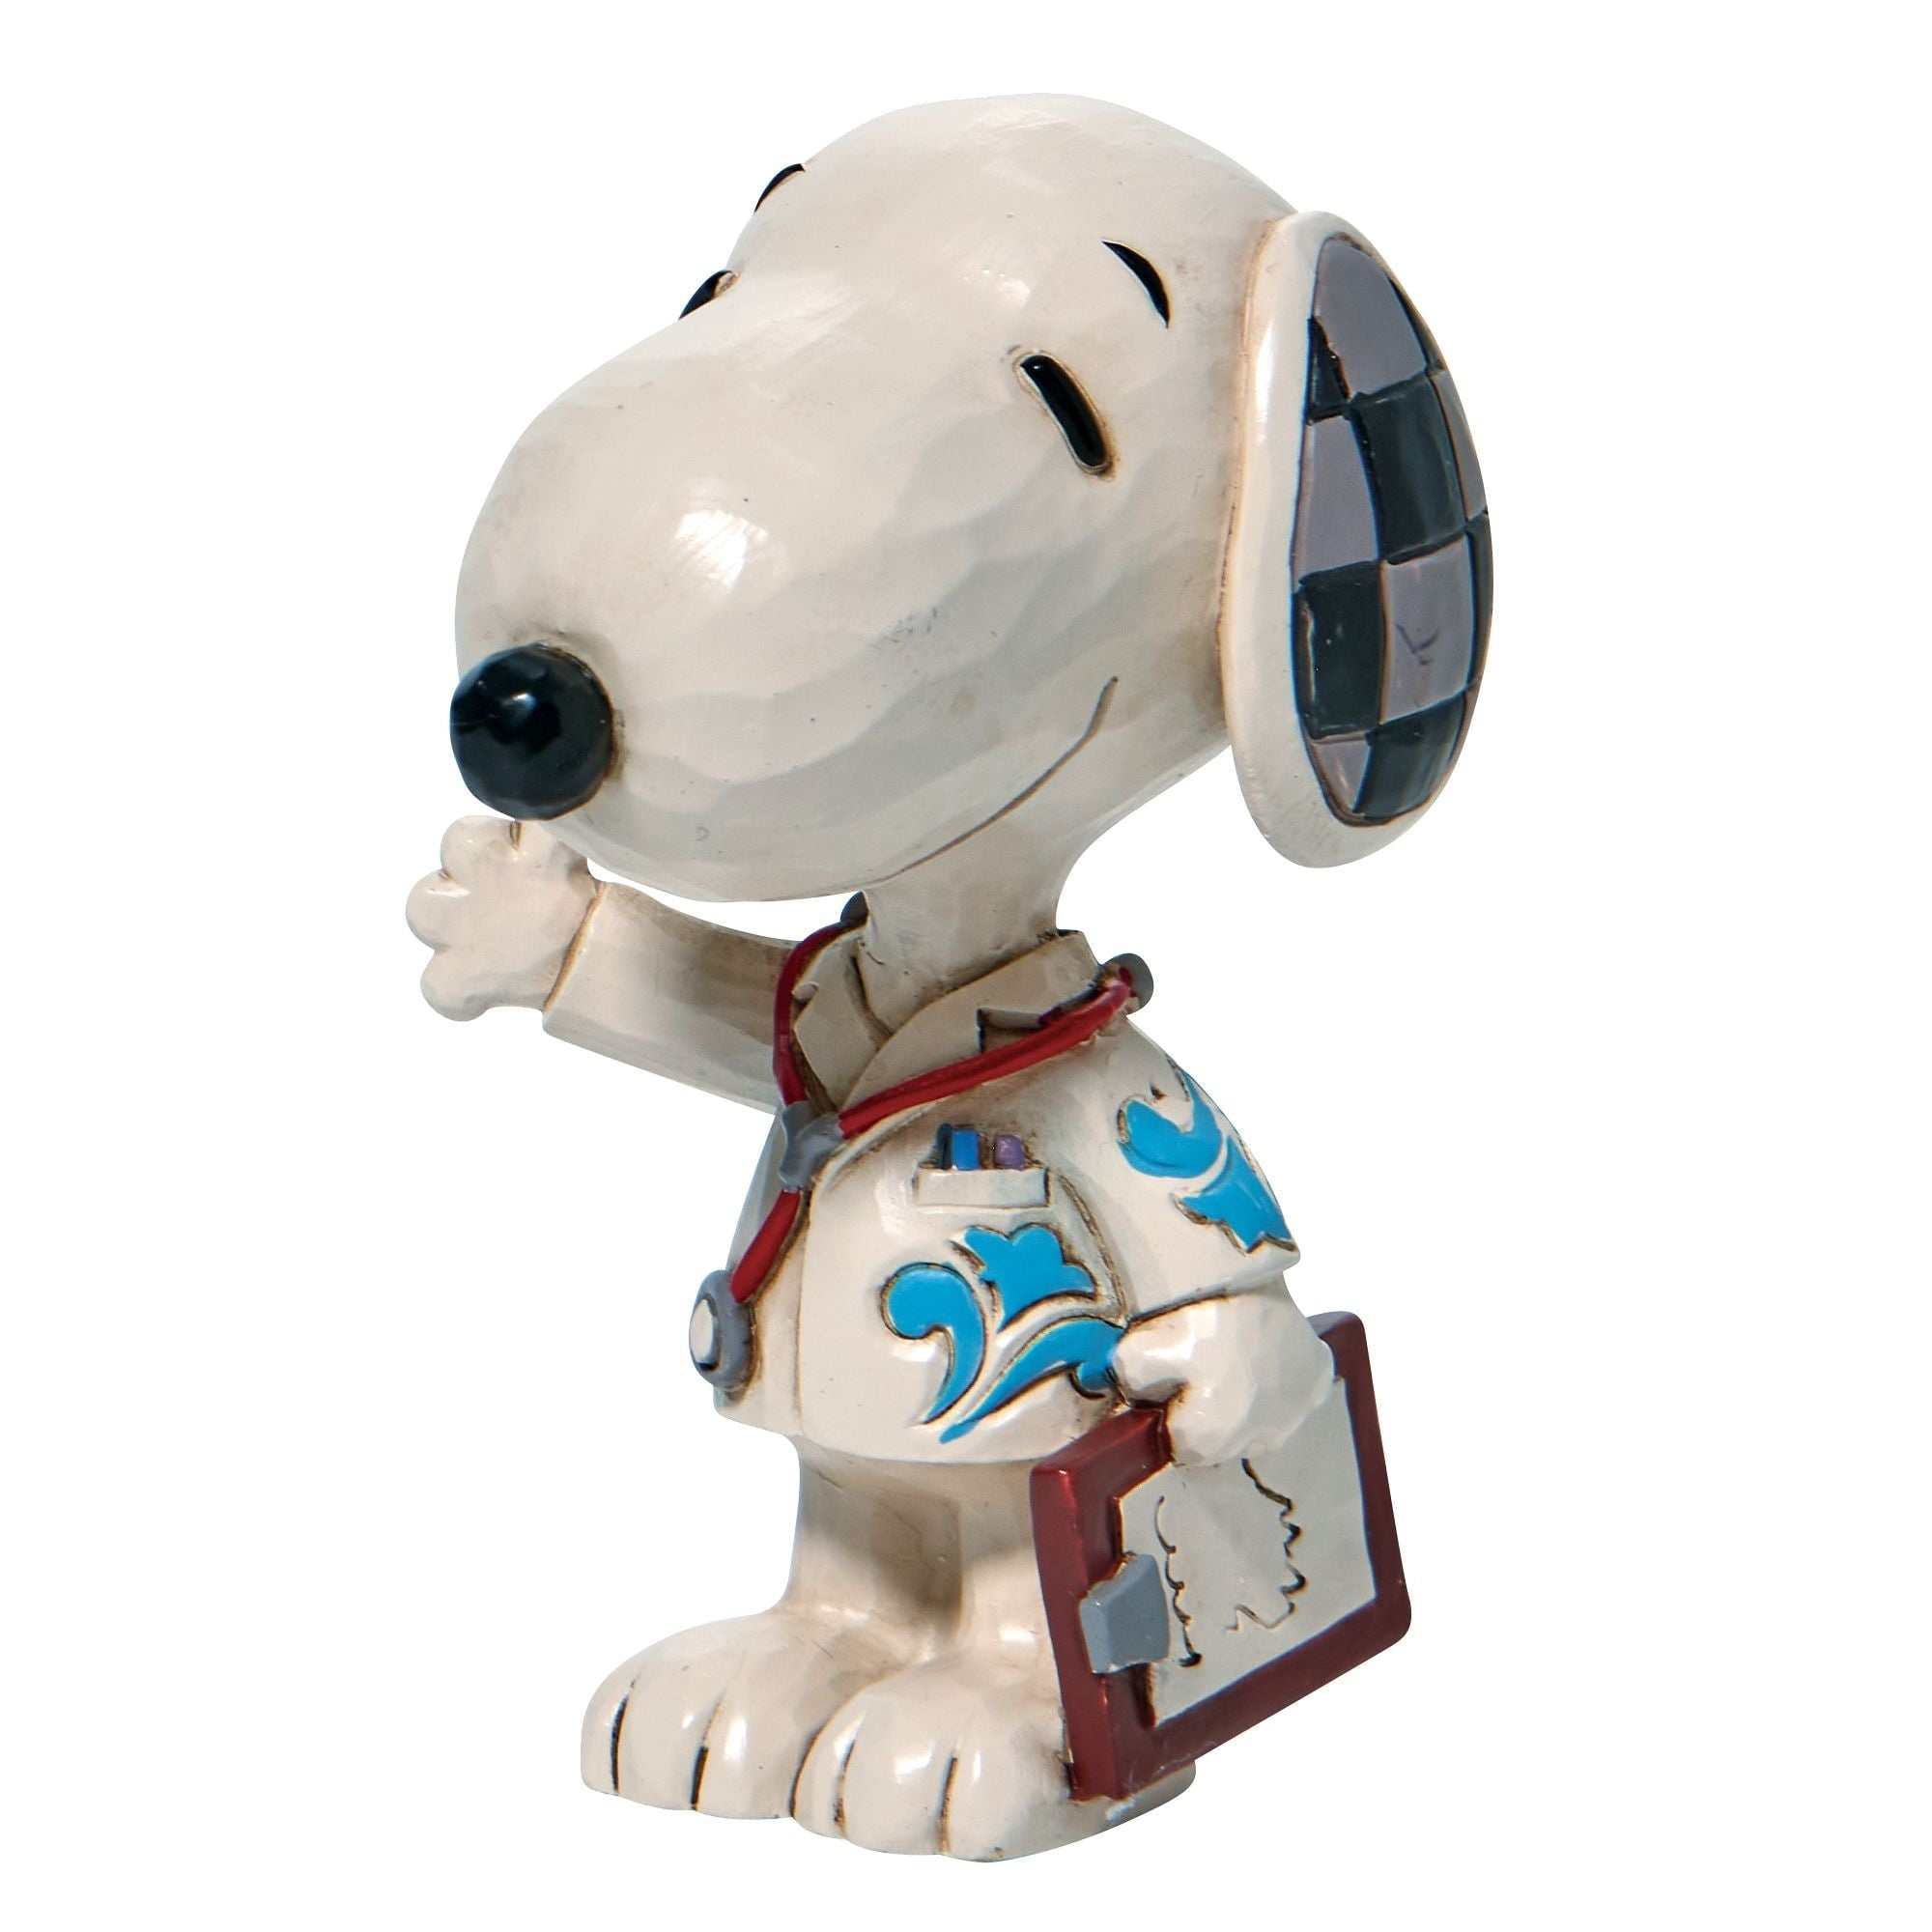 Department 56 Peanuts Village Accessories Snoopy The Flying Ace The Red  Baron Lit Figurine #6007734 - Walmart.com